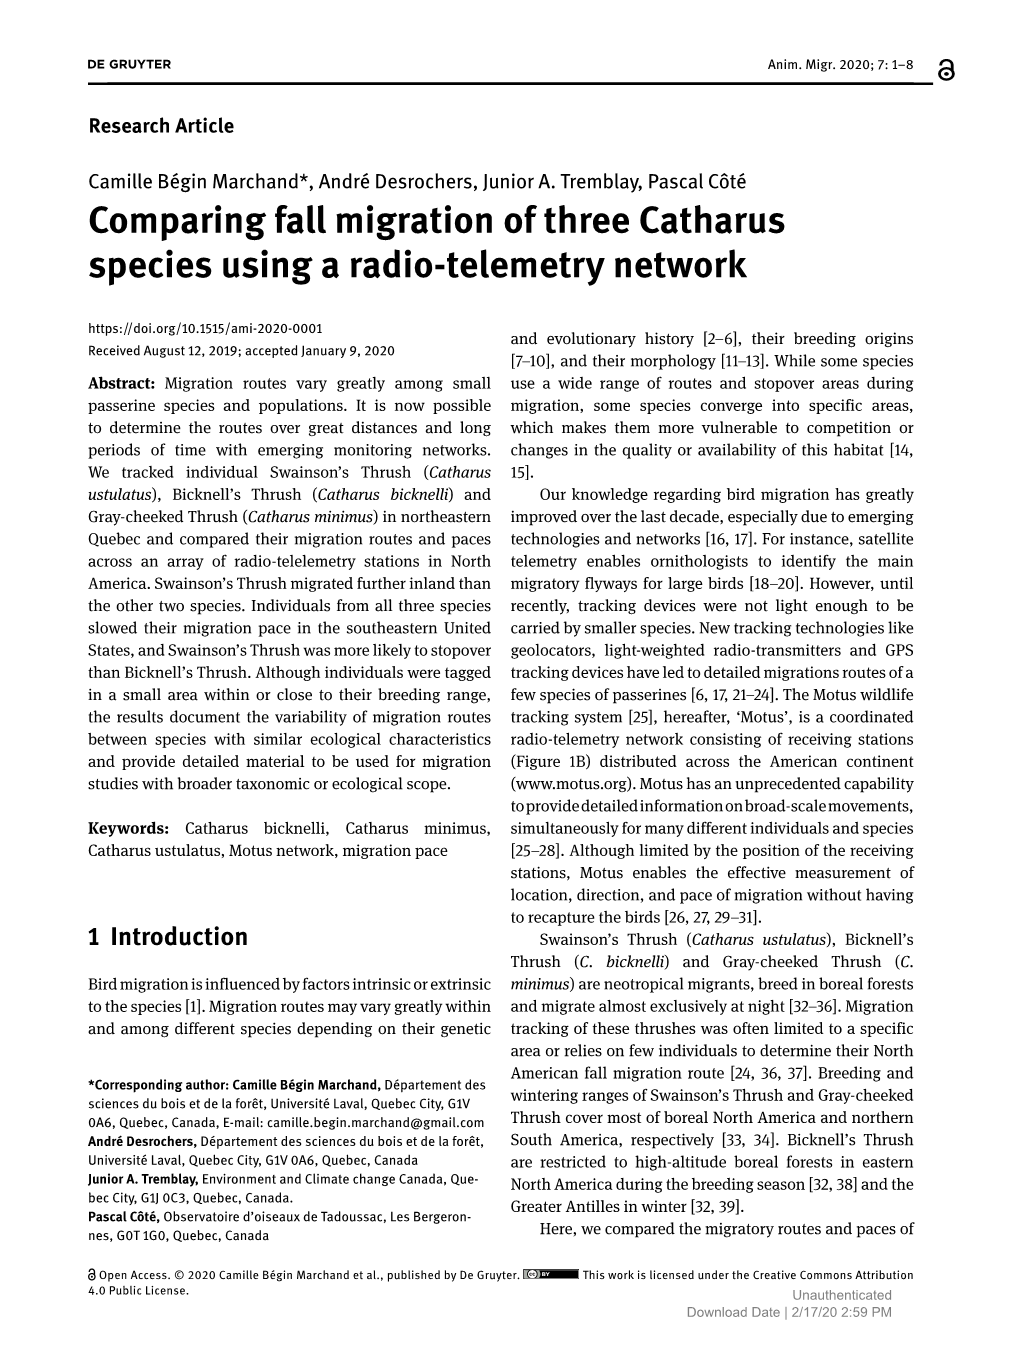 Comparing Fall Migration of Three Catharus Species Using a Radio